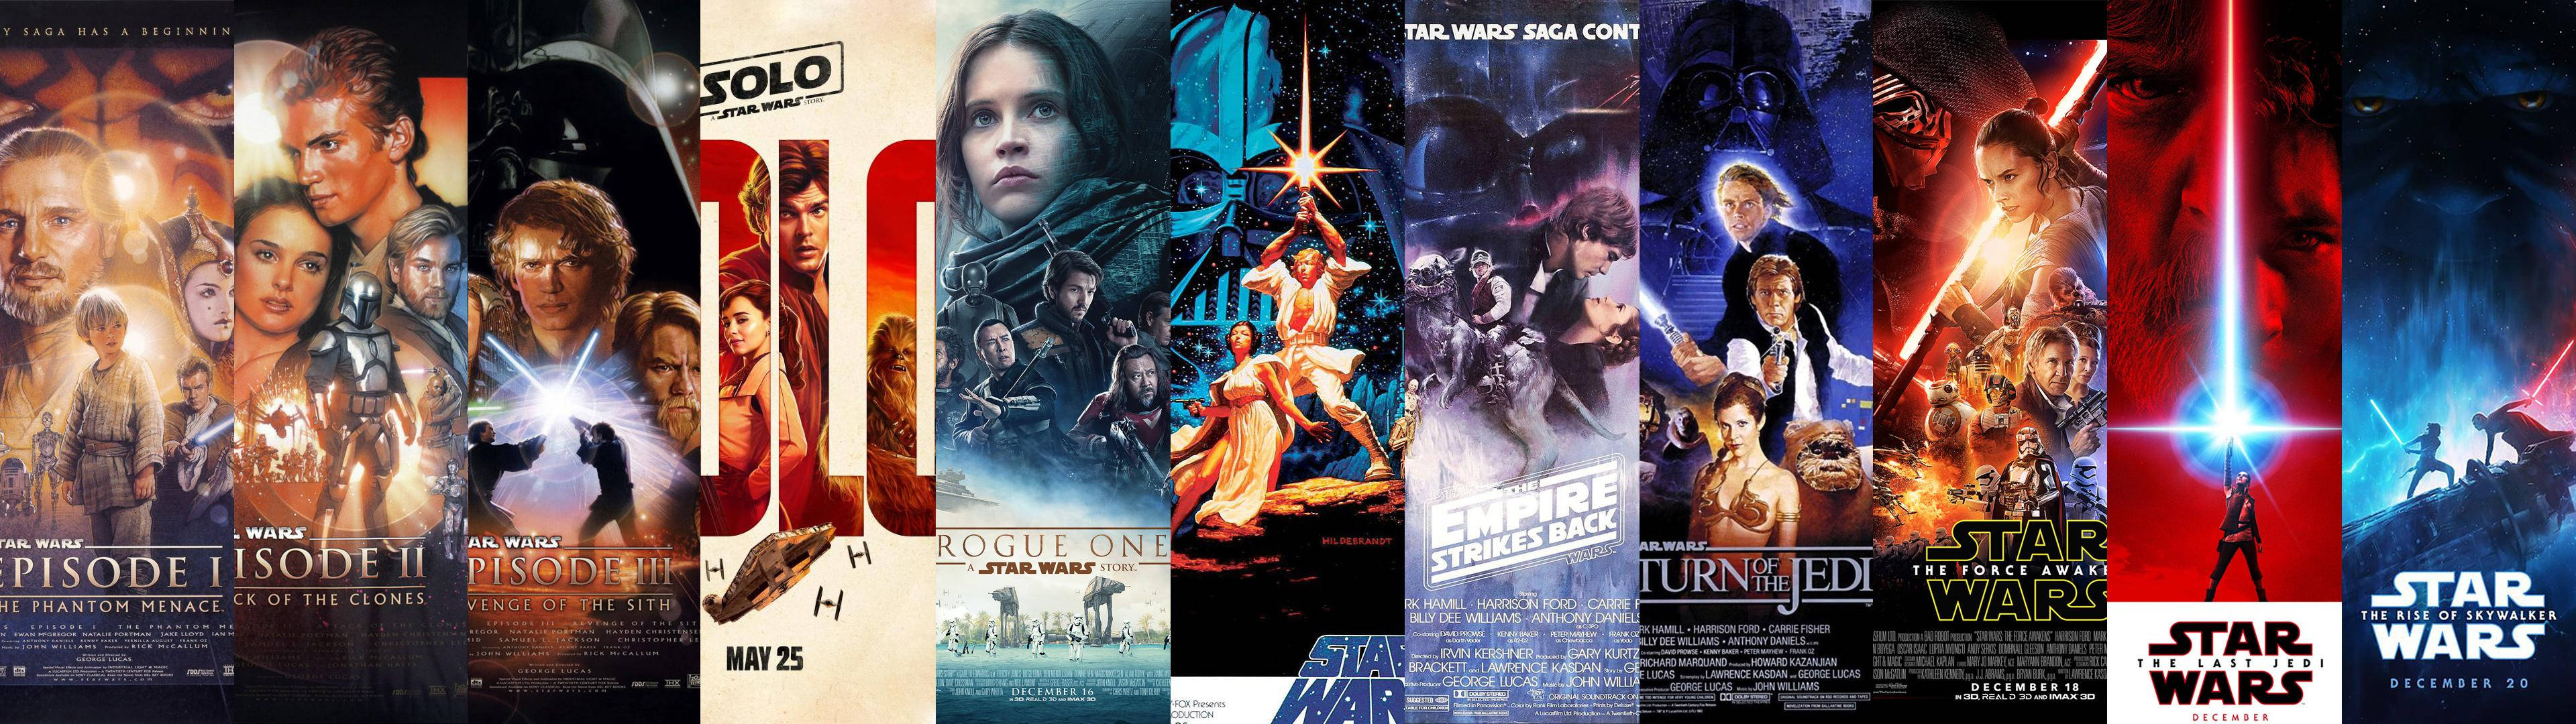 Star Wars Dual Screen Movie Posters Background